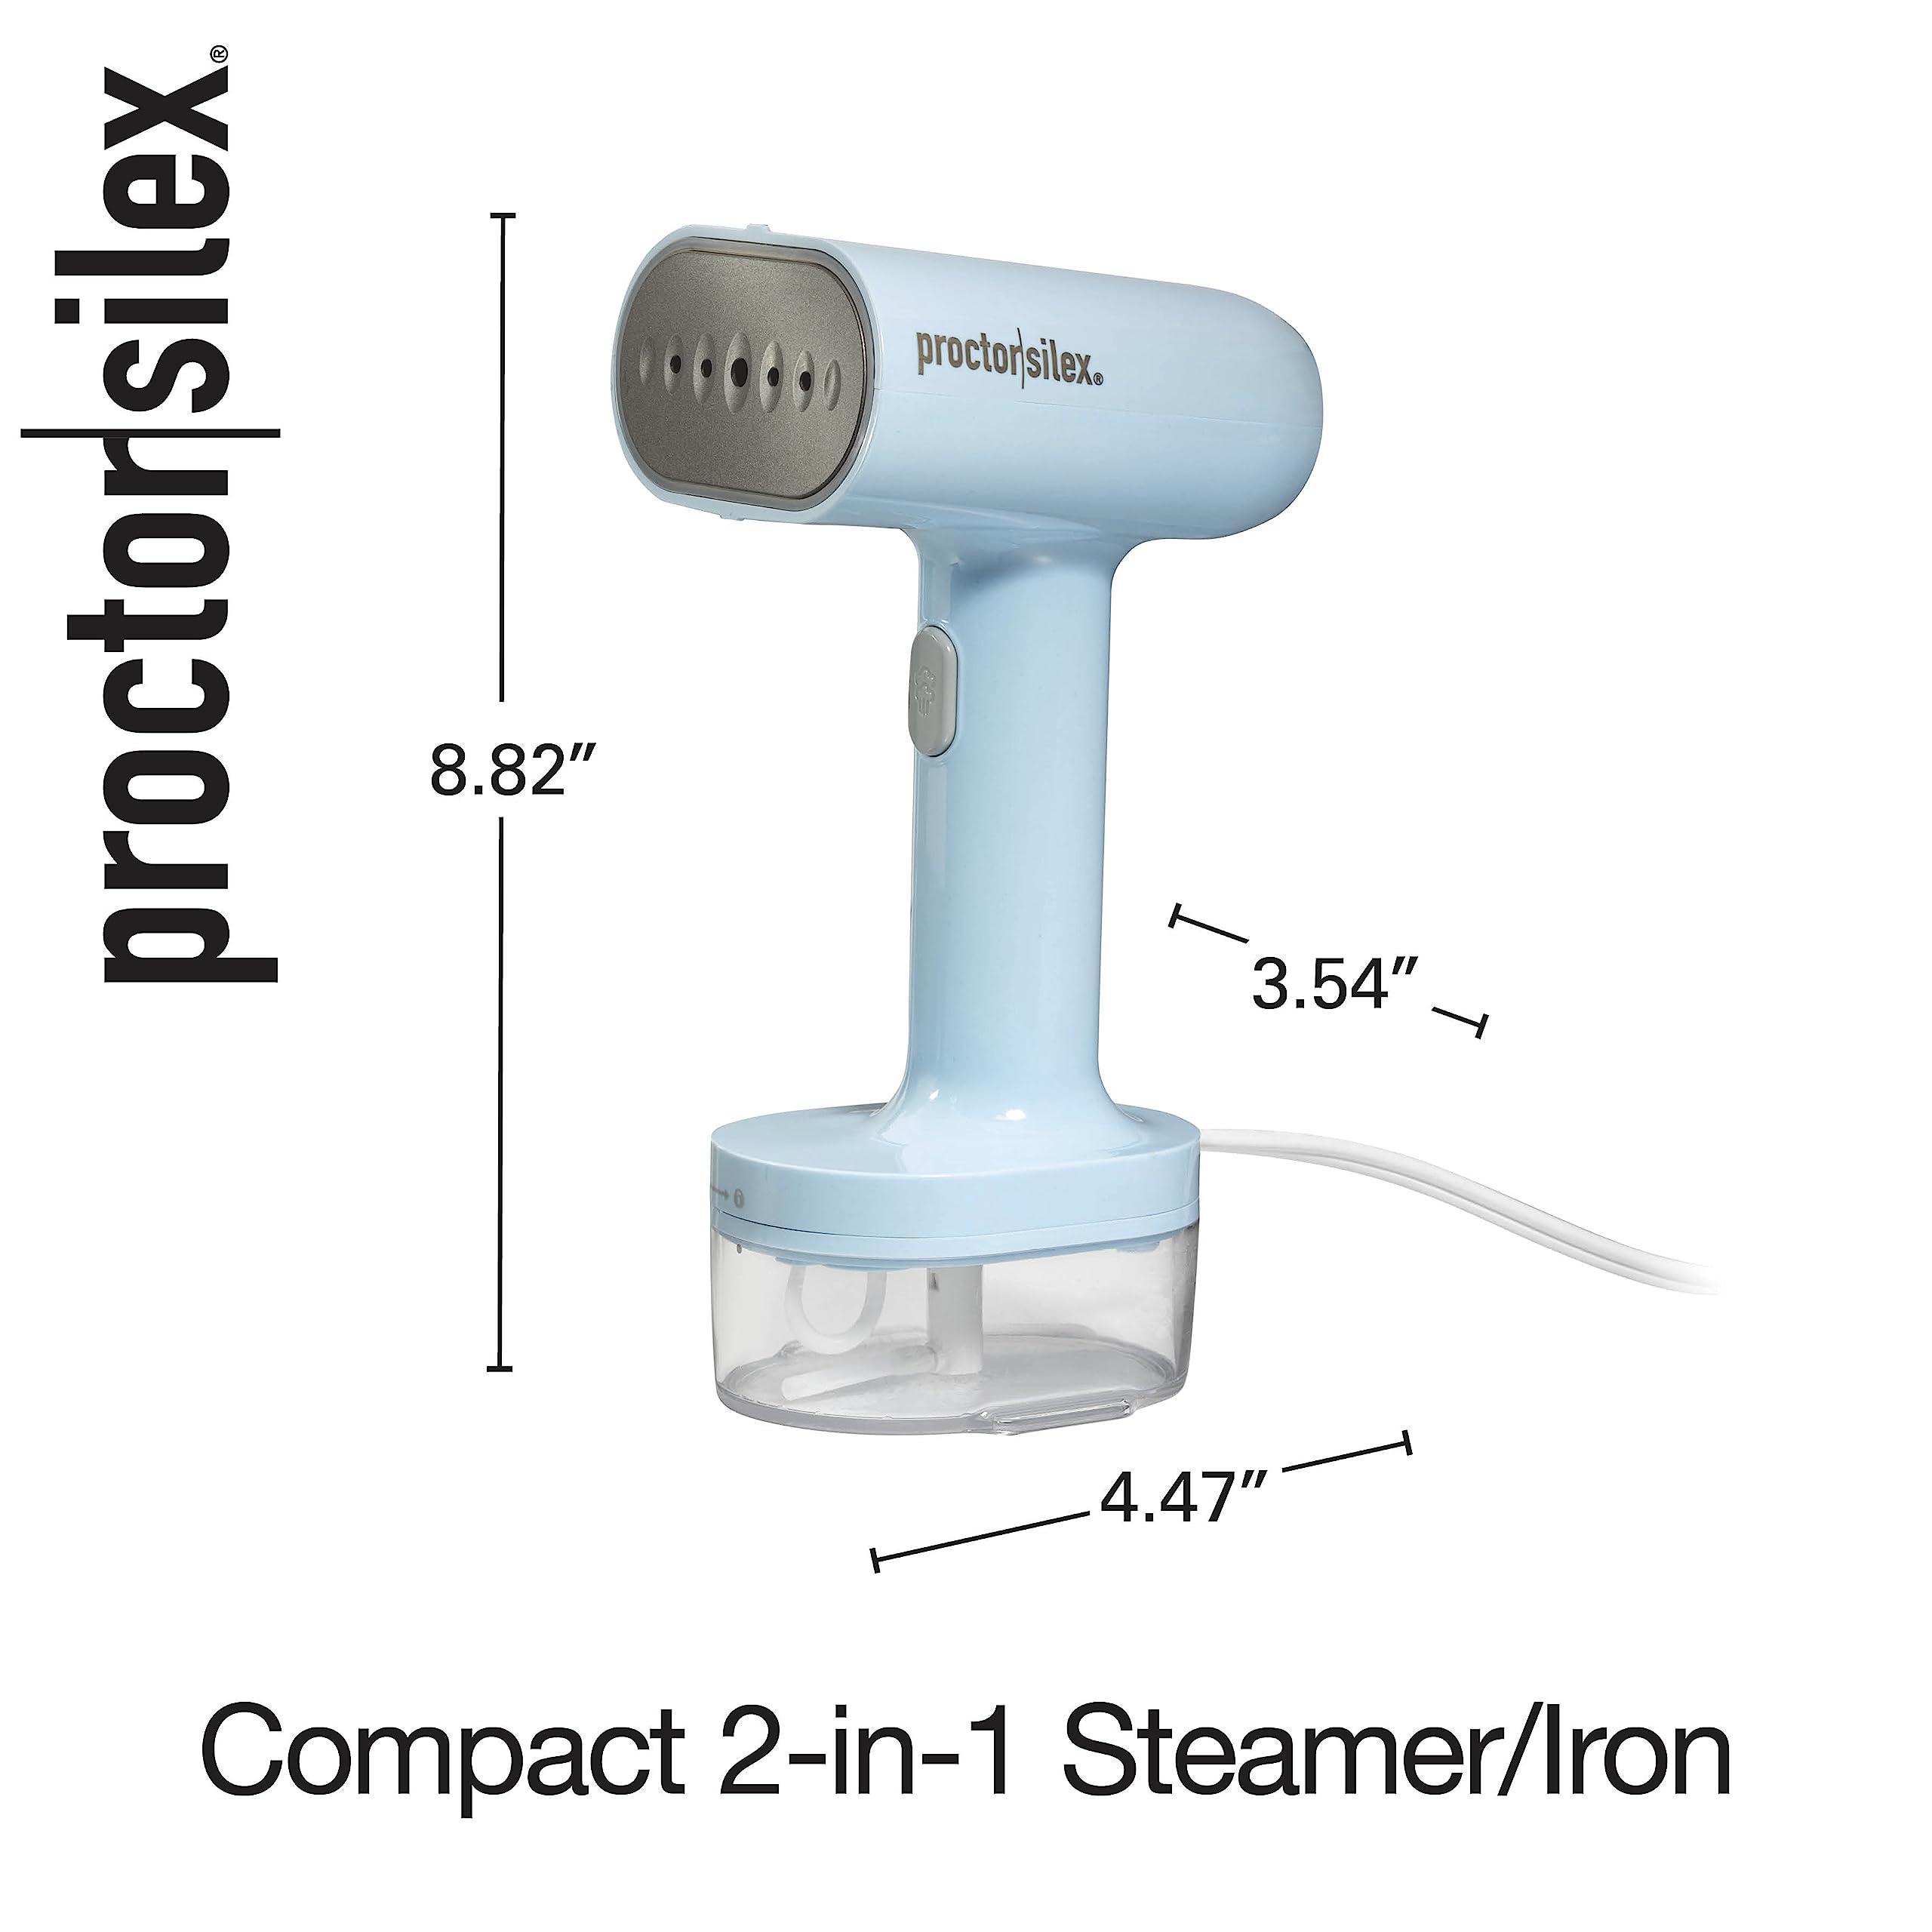 Proctor Silex Compact Travel Iron & Garment Steamer for Clothes, Ready in 45 Seconds for 7 Minutes of Continuous Use, Portable and Lightweight, Vacation Essentials, 120 ml Water Tank, Blue